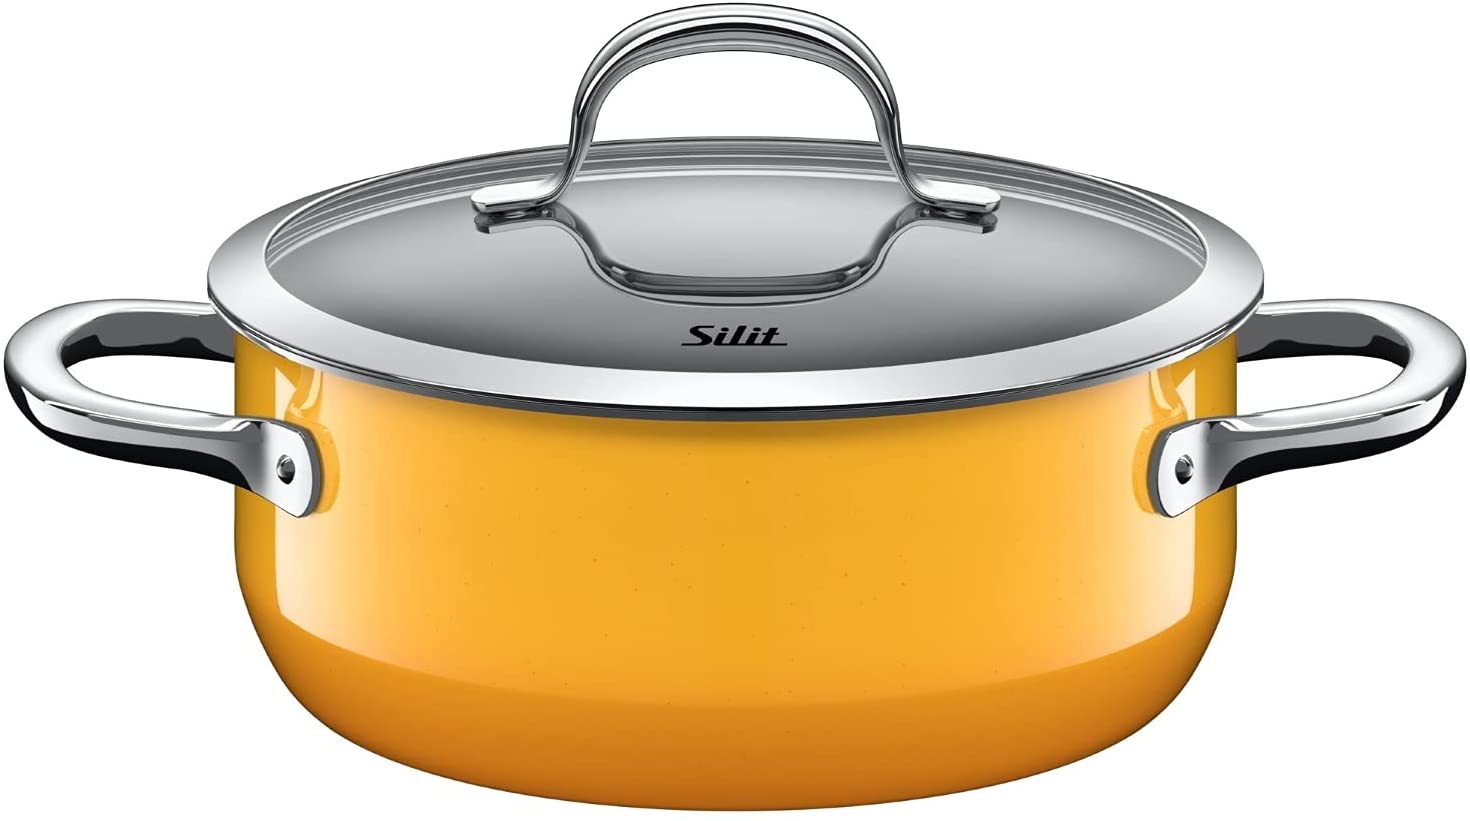 Silit Passion Yellow Saucepan with Glass Lid Diameter 20 cm Silargan Functional Ceramic Pouring Rim Suitable for Induction Cookers Yellow 2.4 L